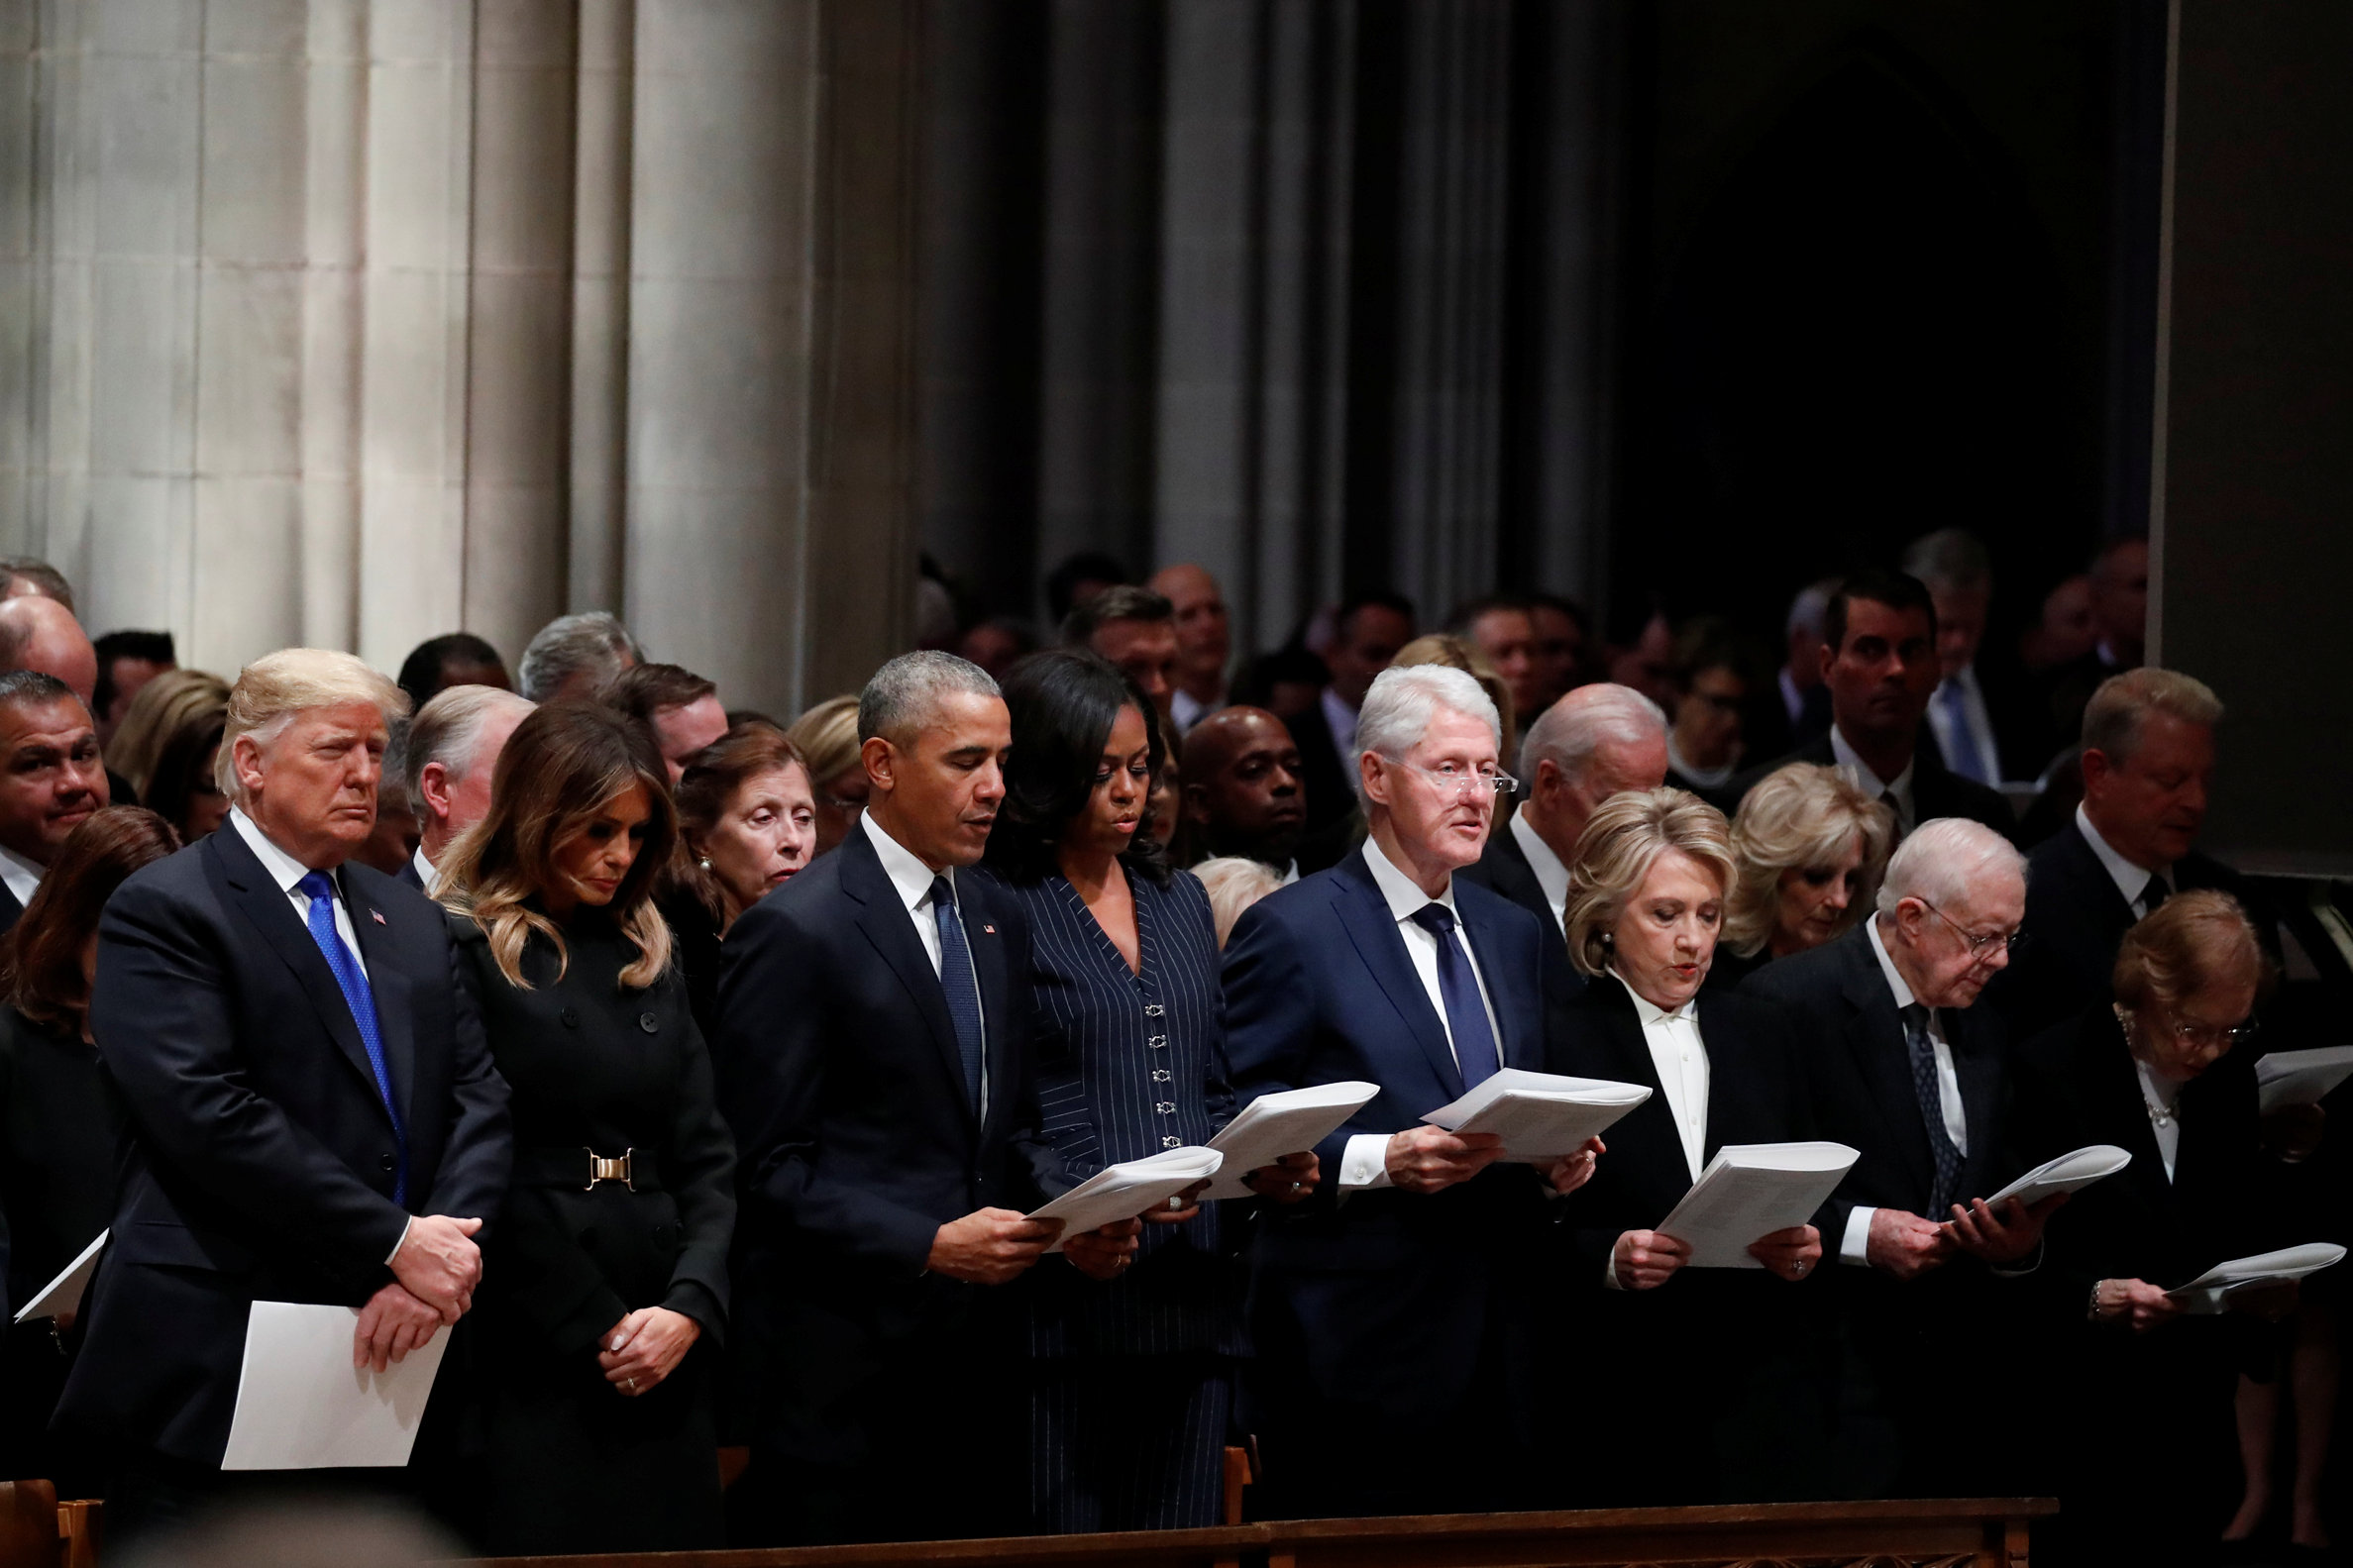 Donald and Melania Trump stand silent during George H.W. Bush’s funeral as three former presidents and first ladies all recite the Apostles' Creed, Washington National Cathedral, December 5, 2018.